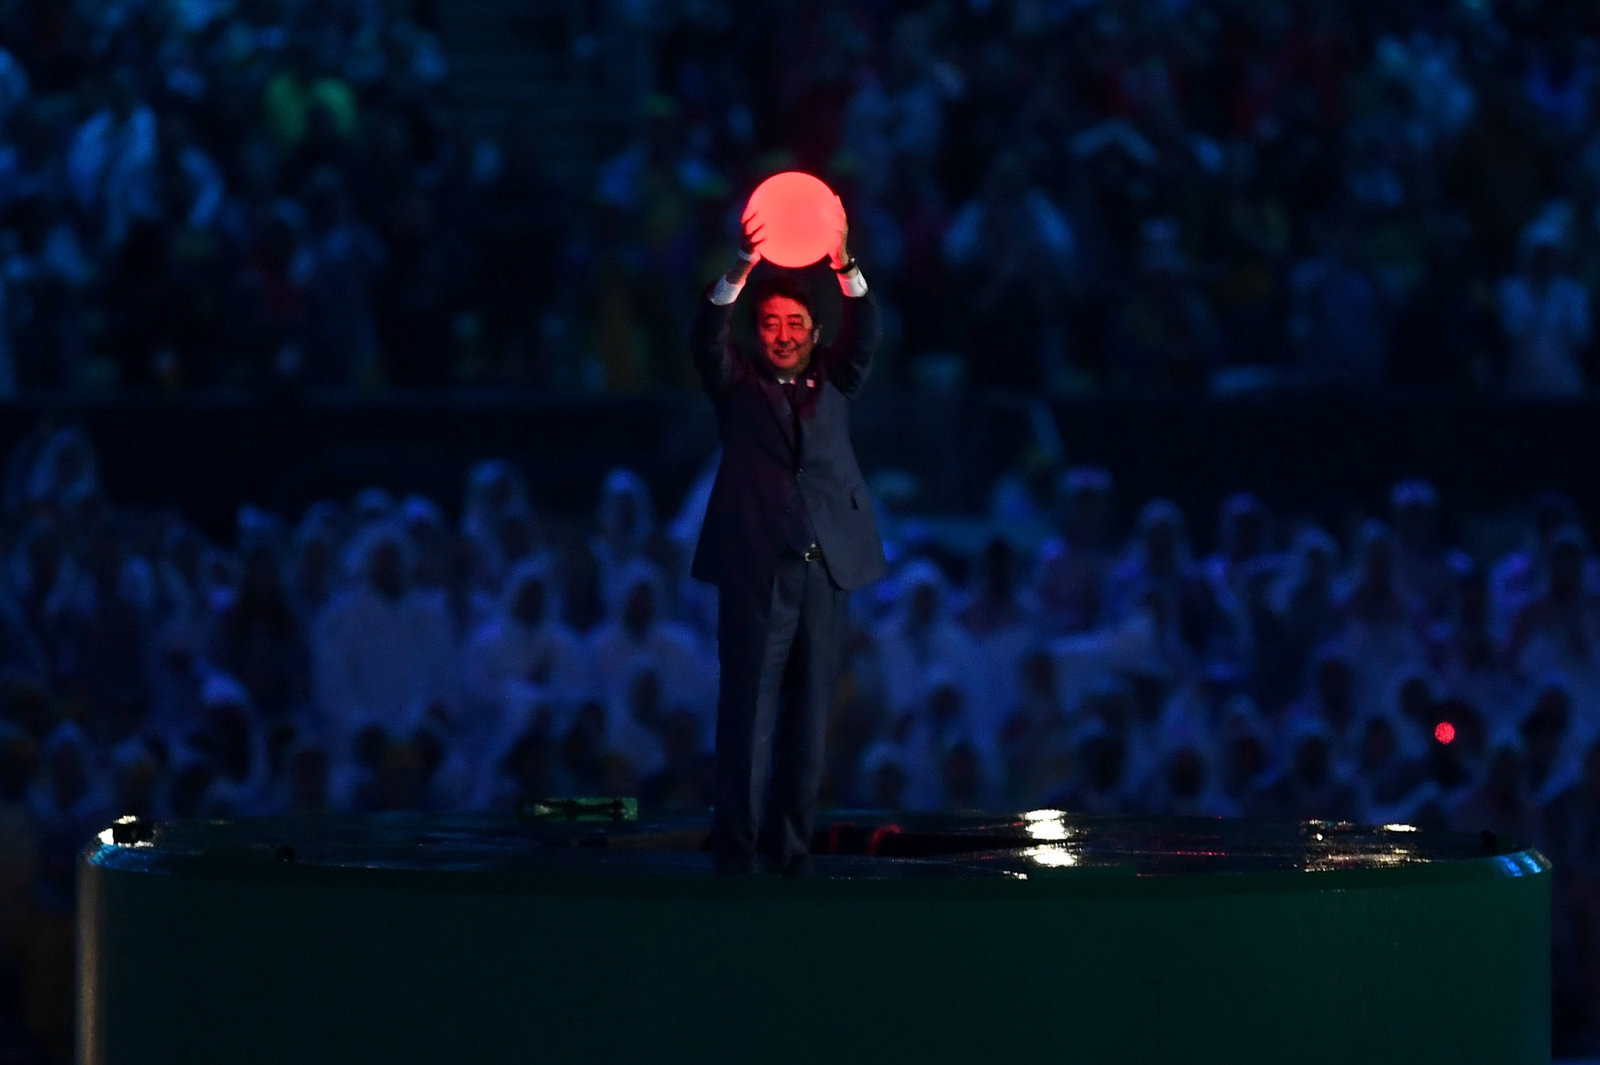 Japan's Prime Minister Shinzo Abe appears during the closing ceremony.